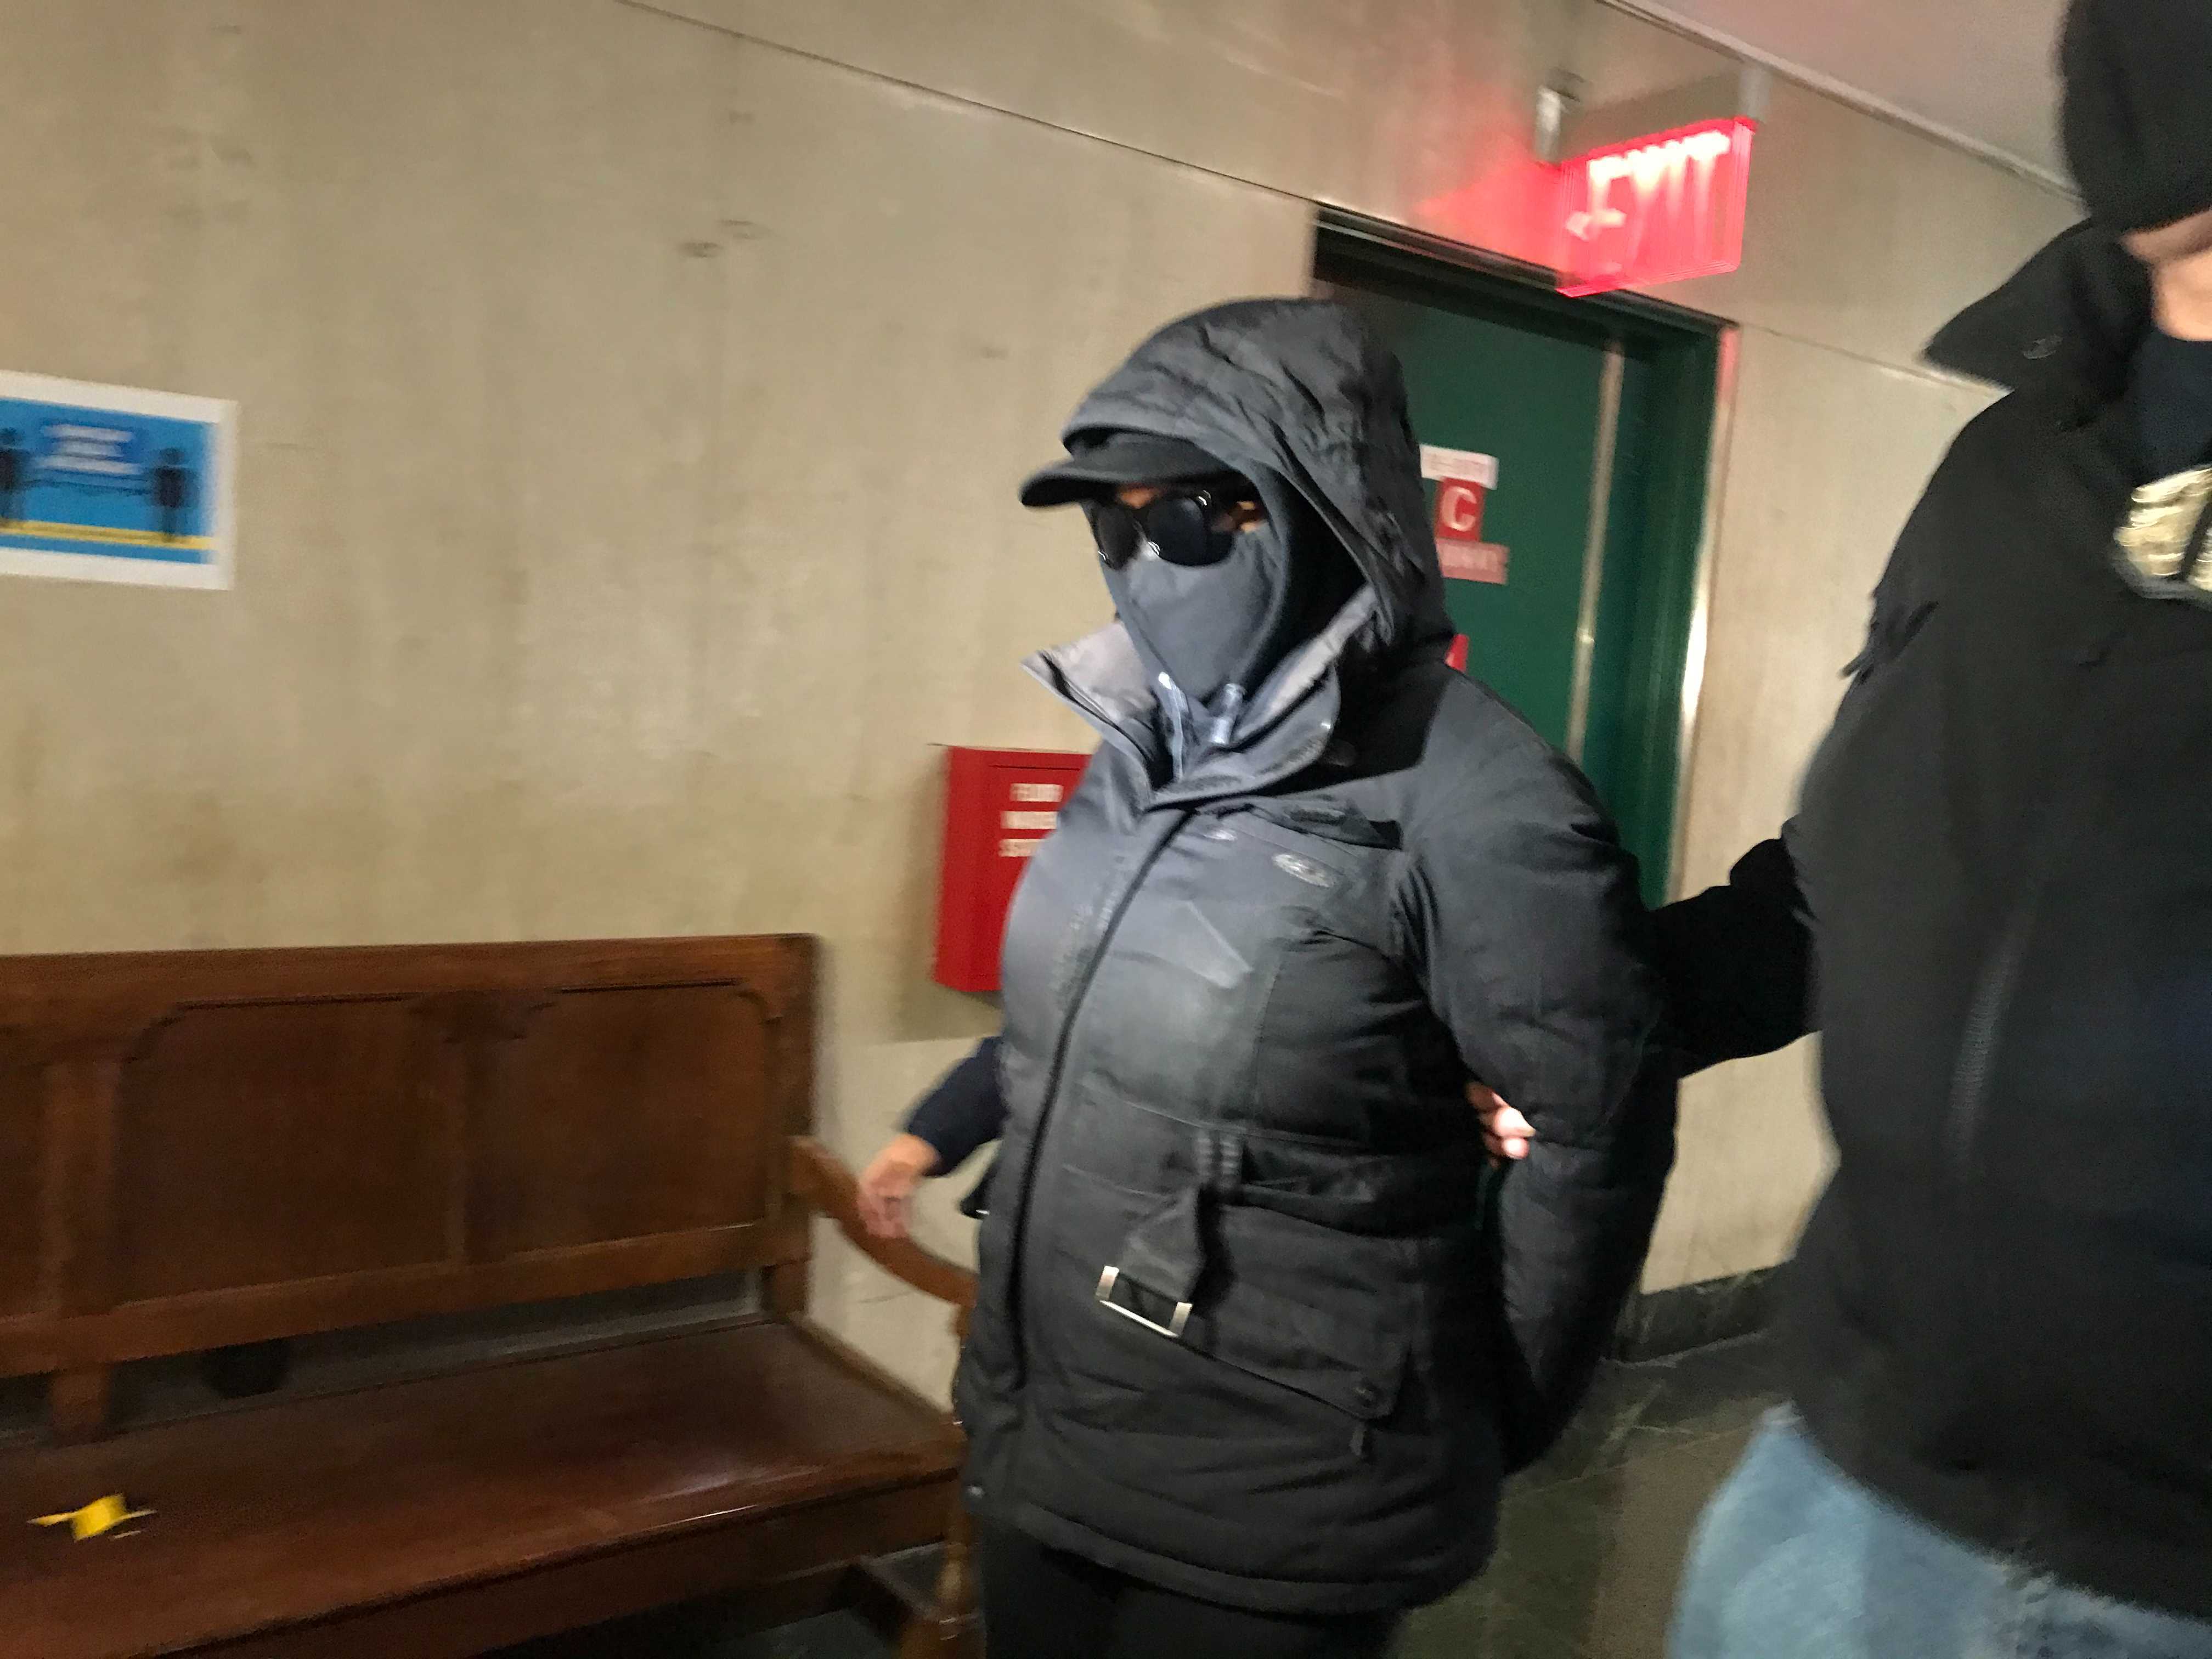 Captain Rebecca Hillman, her face obscured by a mask and sunglasses, appearing in court for her arraignment.